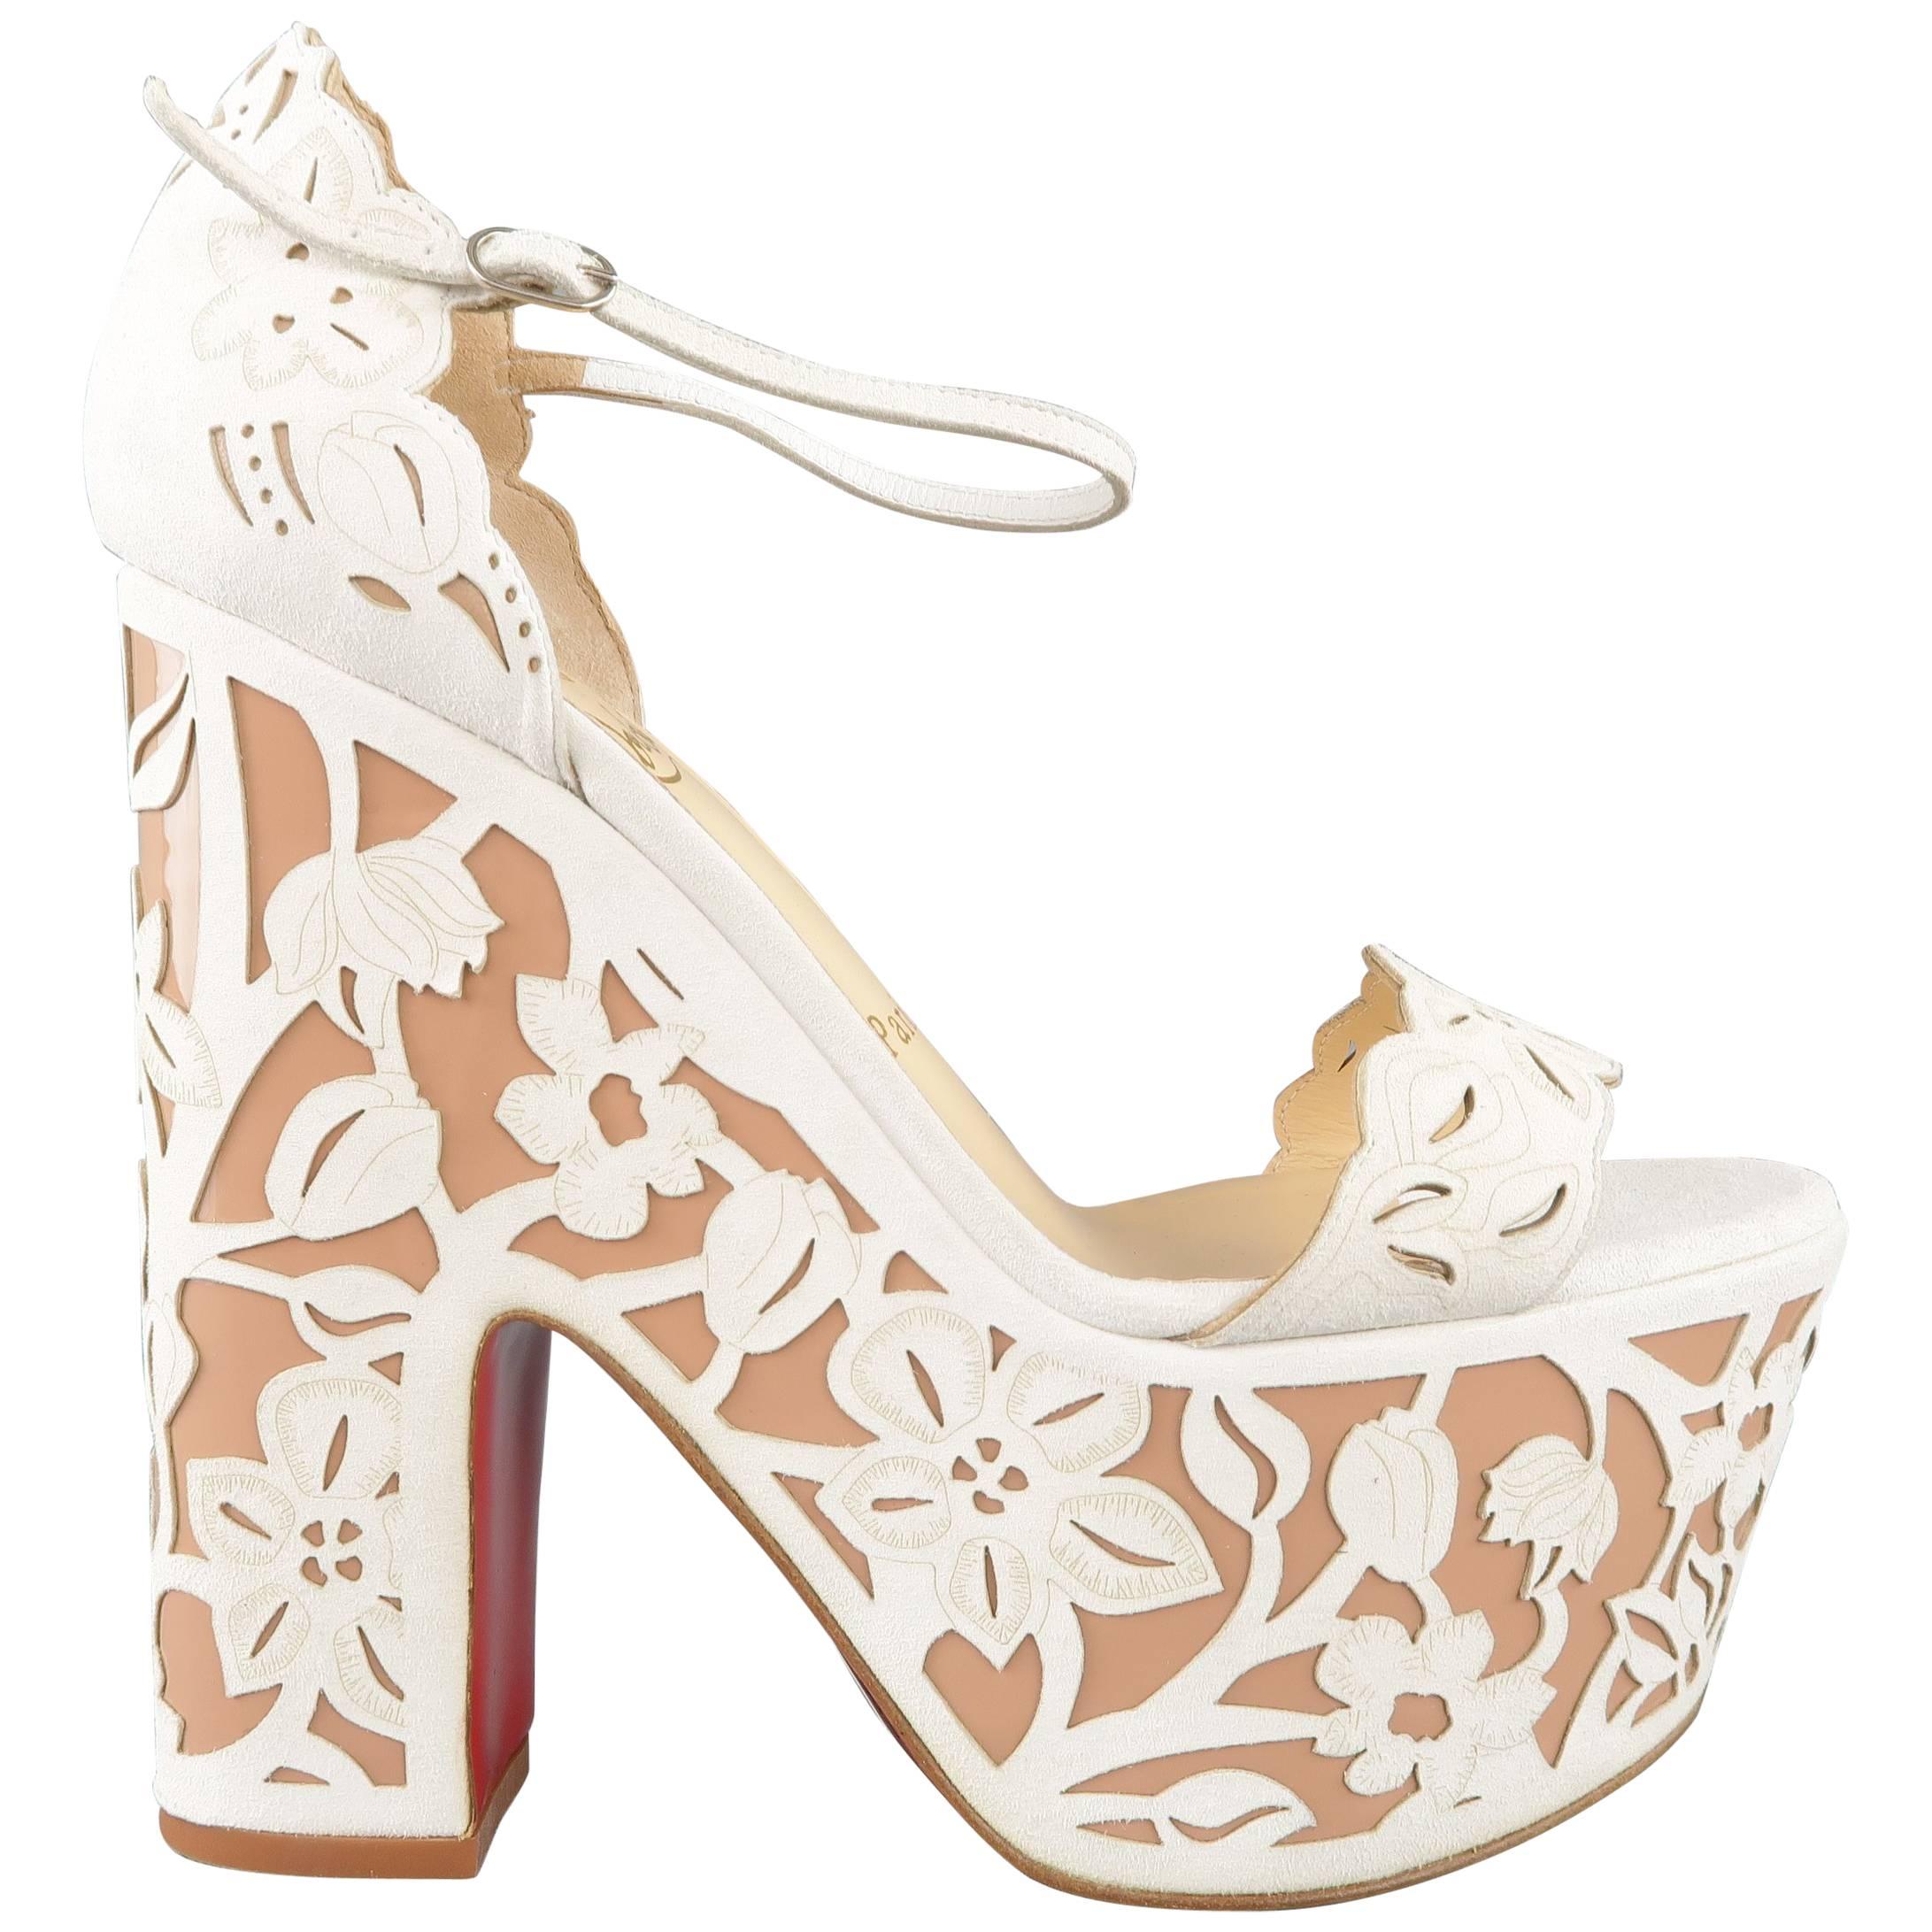 CHRISTIAN LOUBOUTIN Size 9 Off White Floral Suede Platform 'Houghton' Sandals